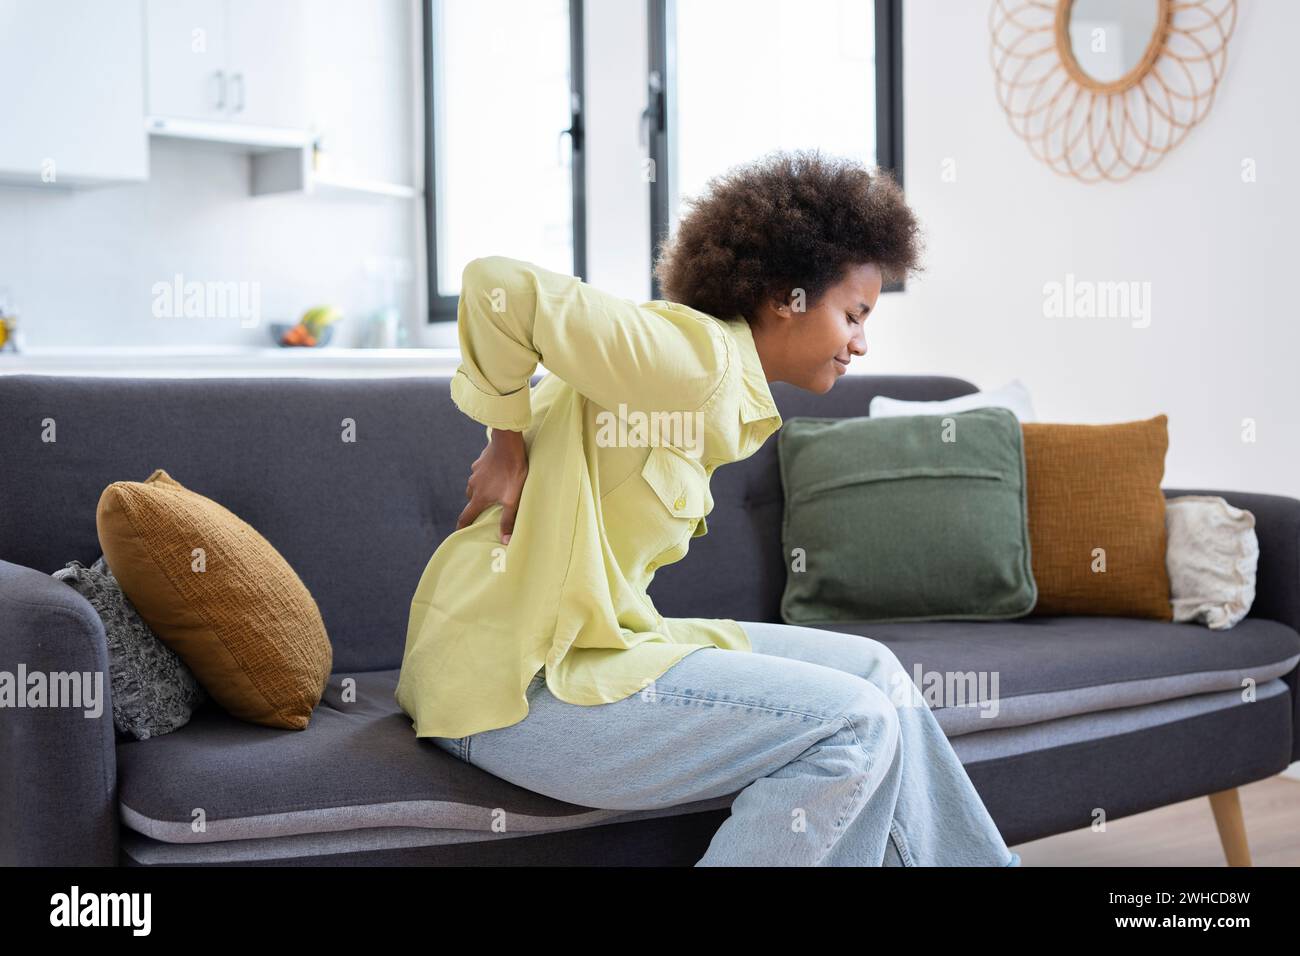 Afro student girl suffers from backache feeling badly, sitting on couch in living room at home. Has a back pain after studying at the computer for a long time. Sedentary work and bad posture concept Stock Photo